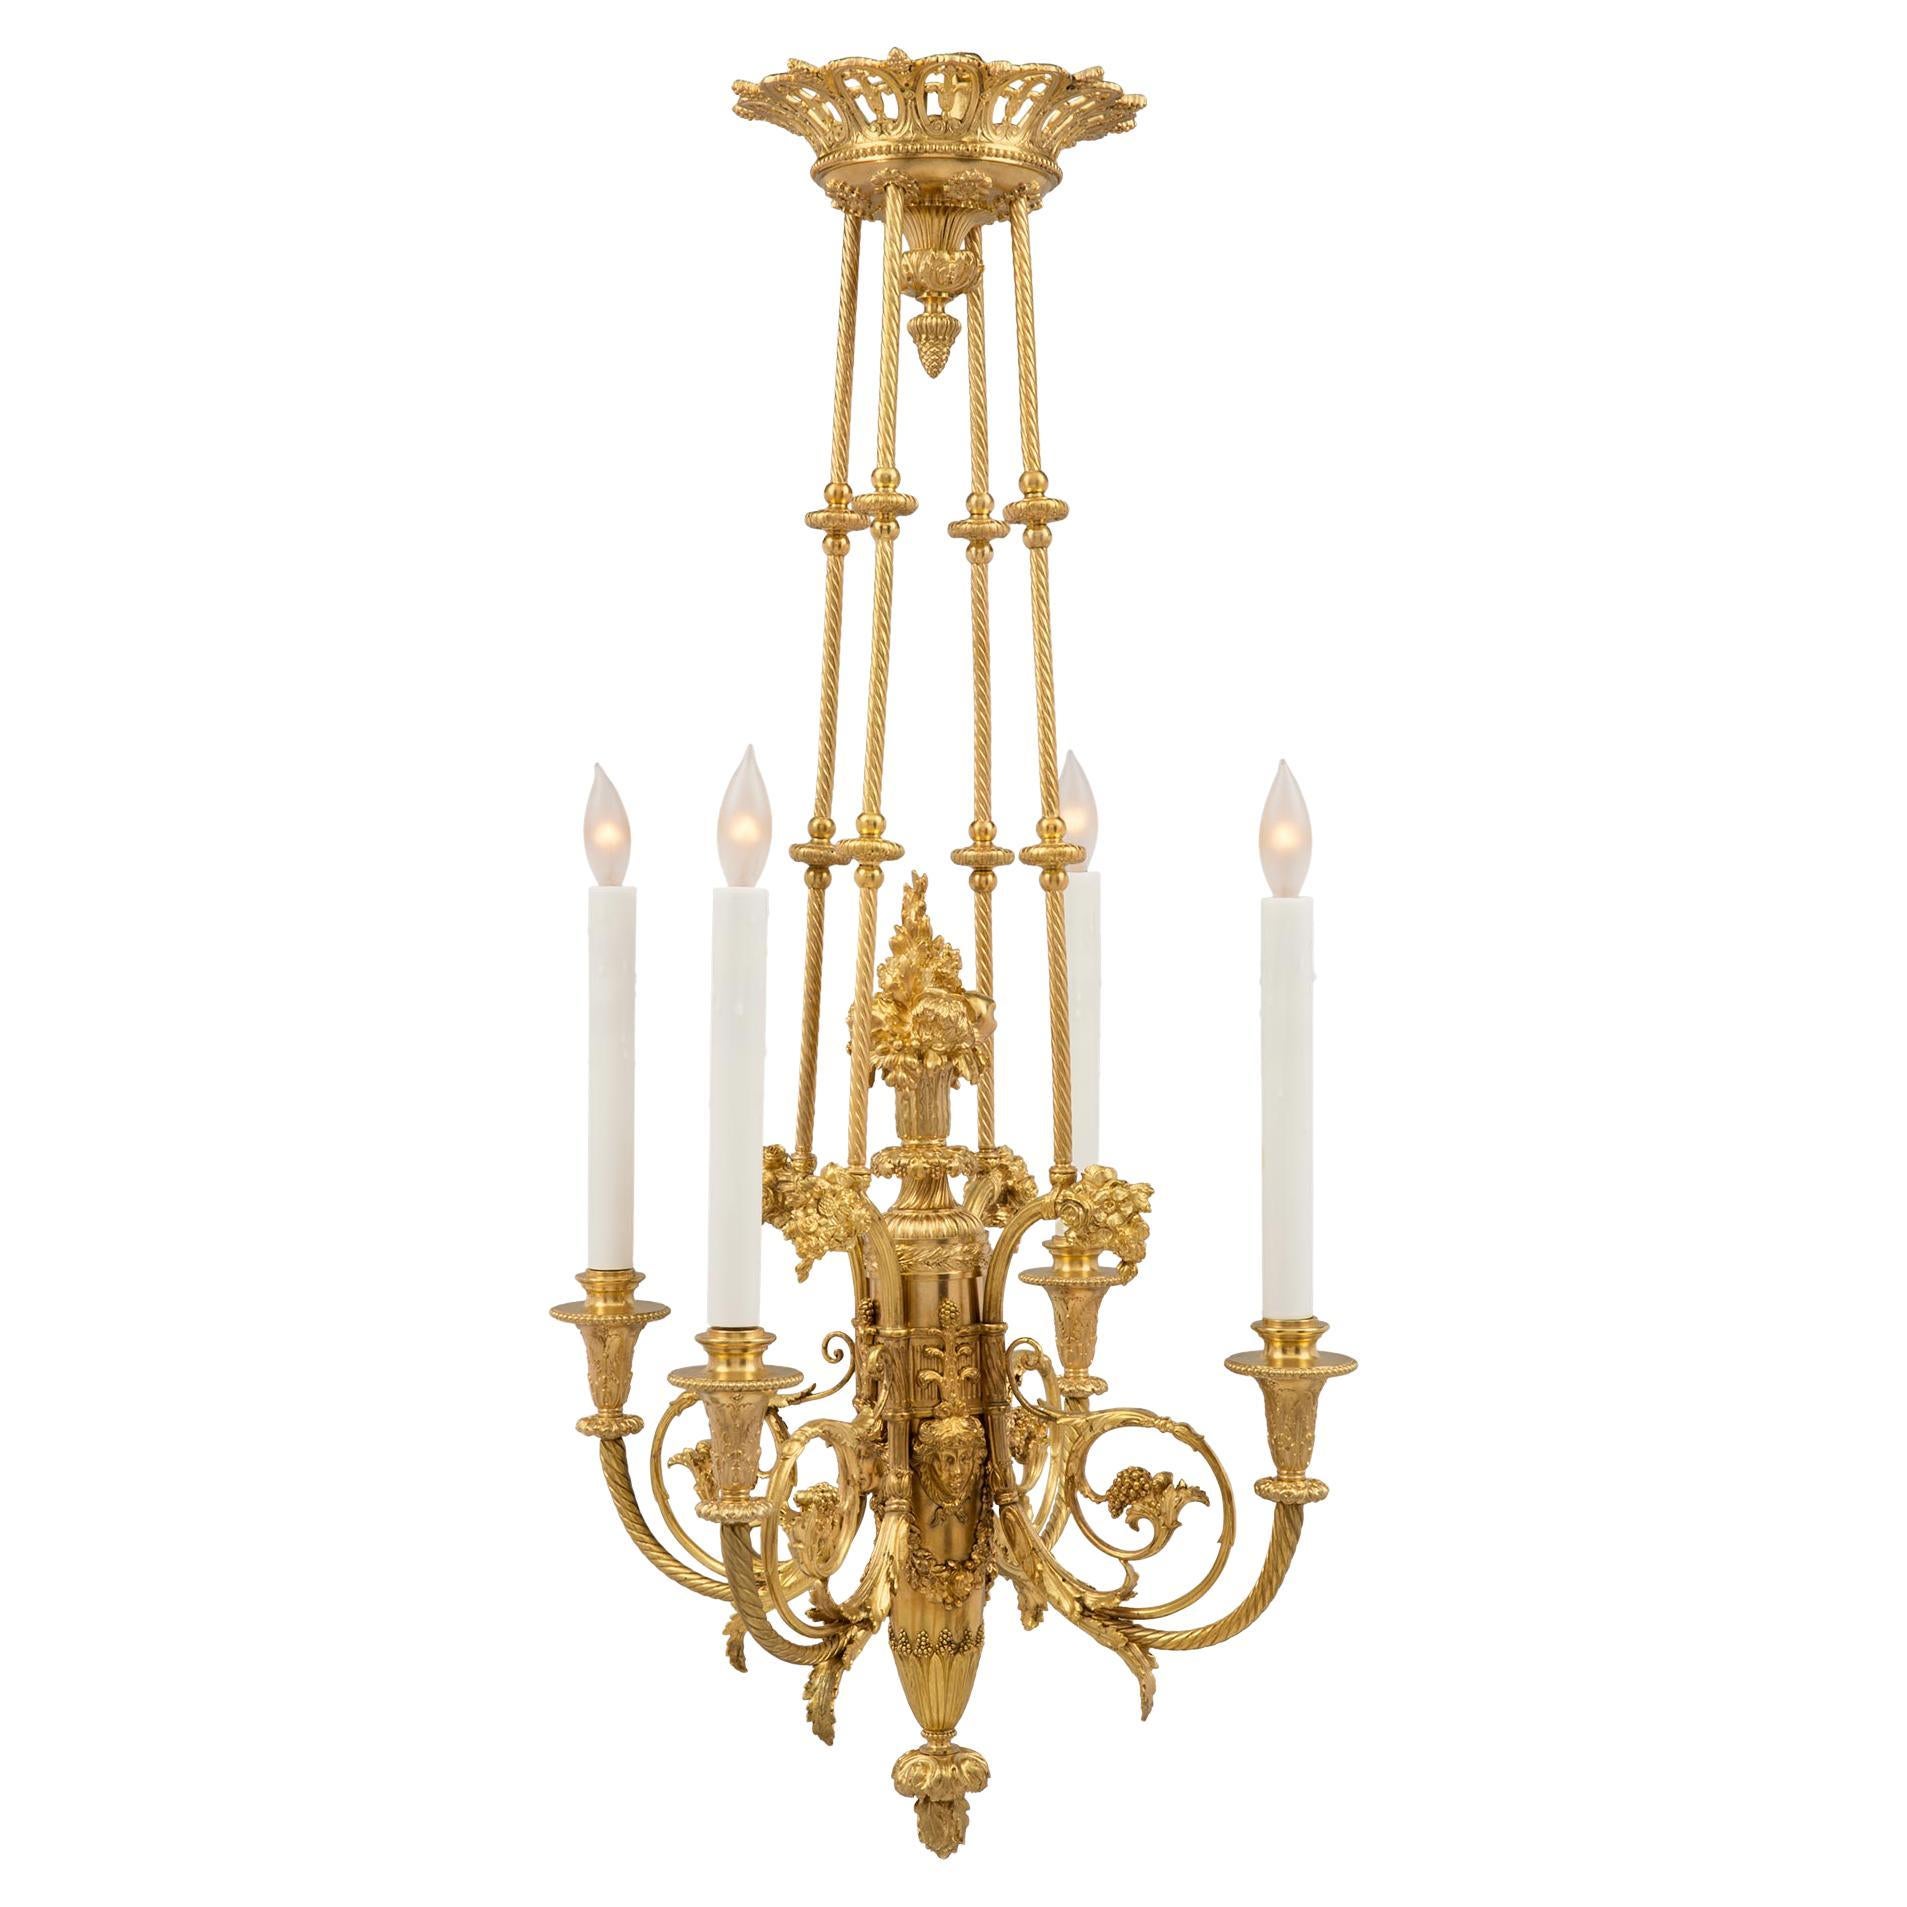 French 19th Century Louis XVI Style Chandelier, Signed F. Barbedienne, Paris